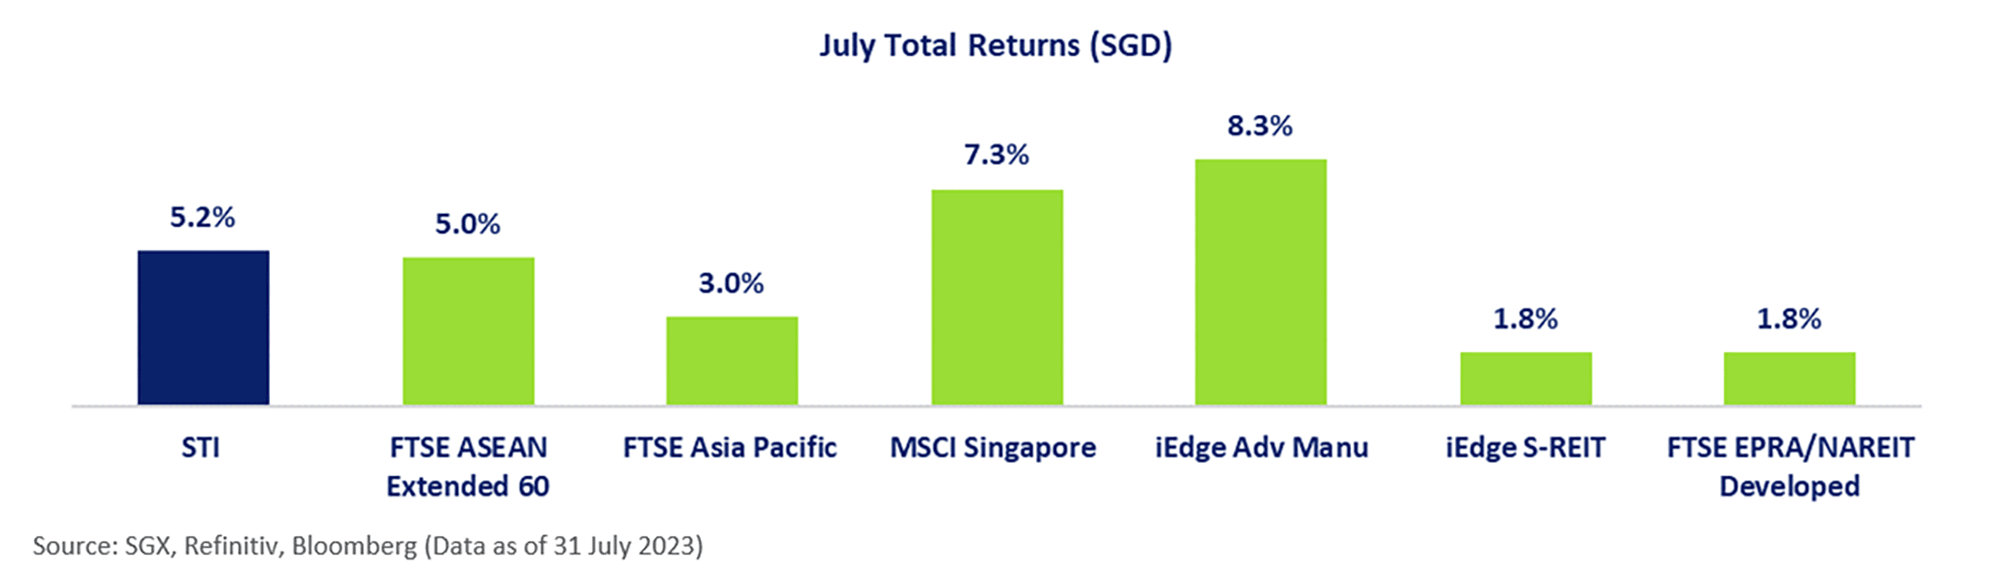 Stock Indices Performance in July 2023